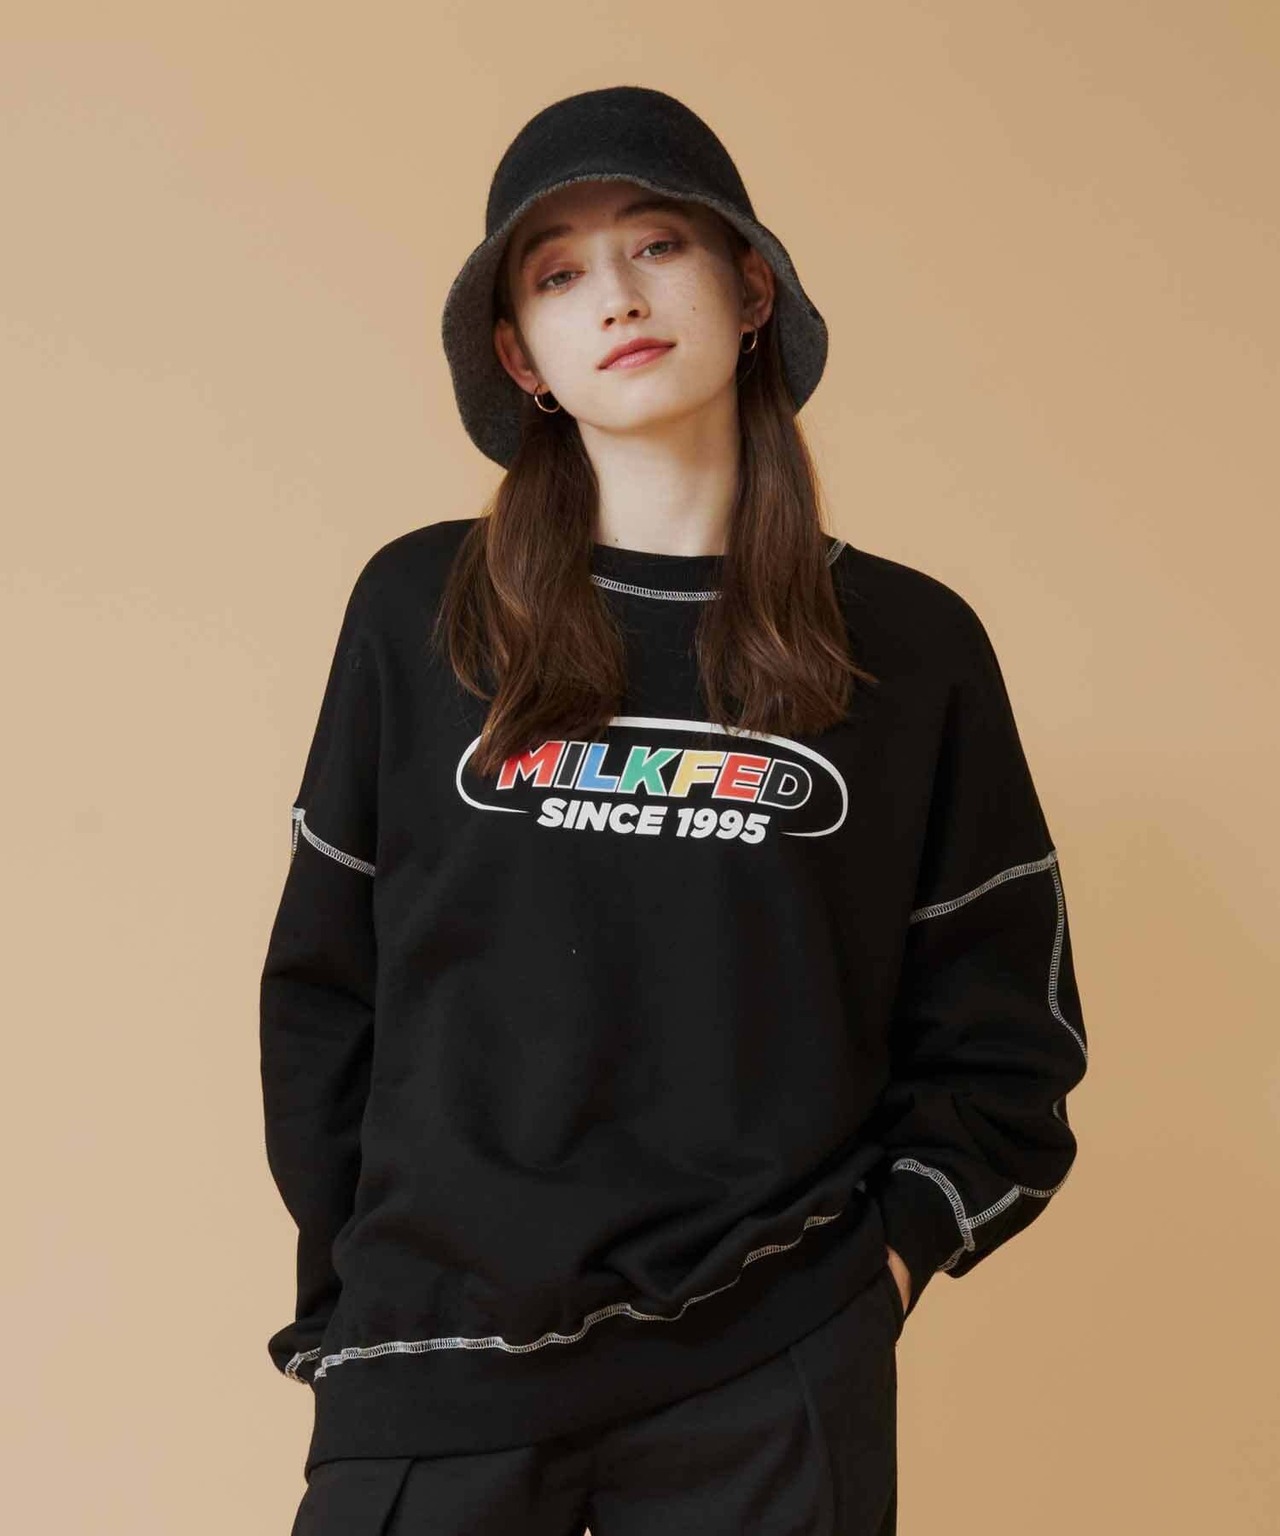 【MILKFED.】COLORFUL EMBROIDERY LOGO SWEAT TOP